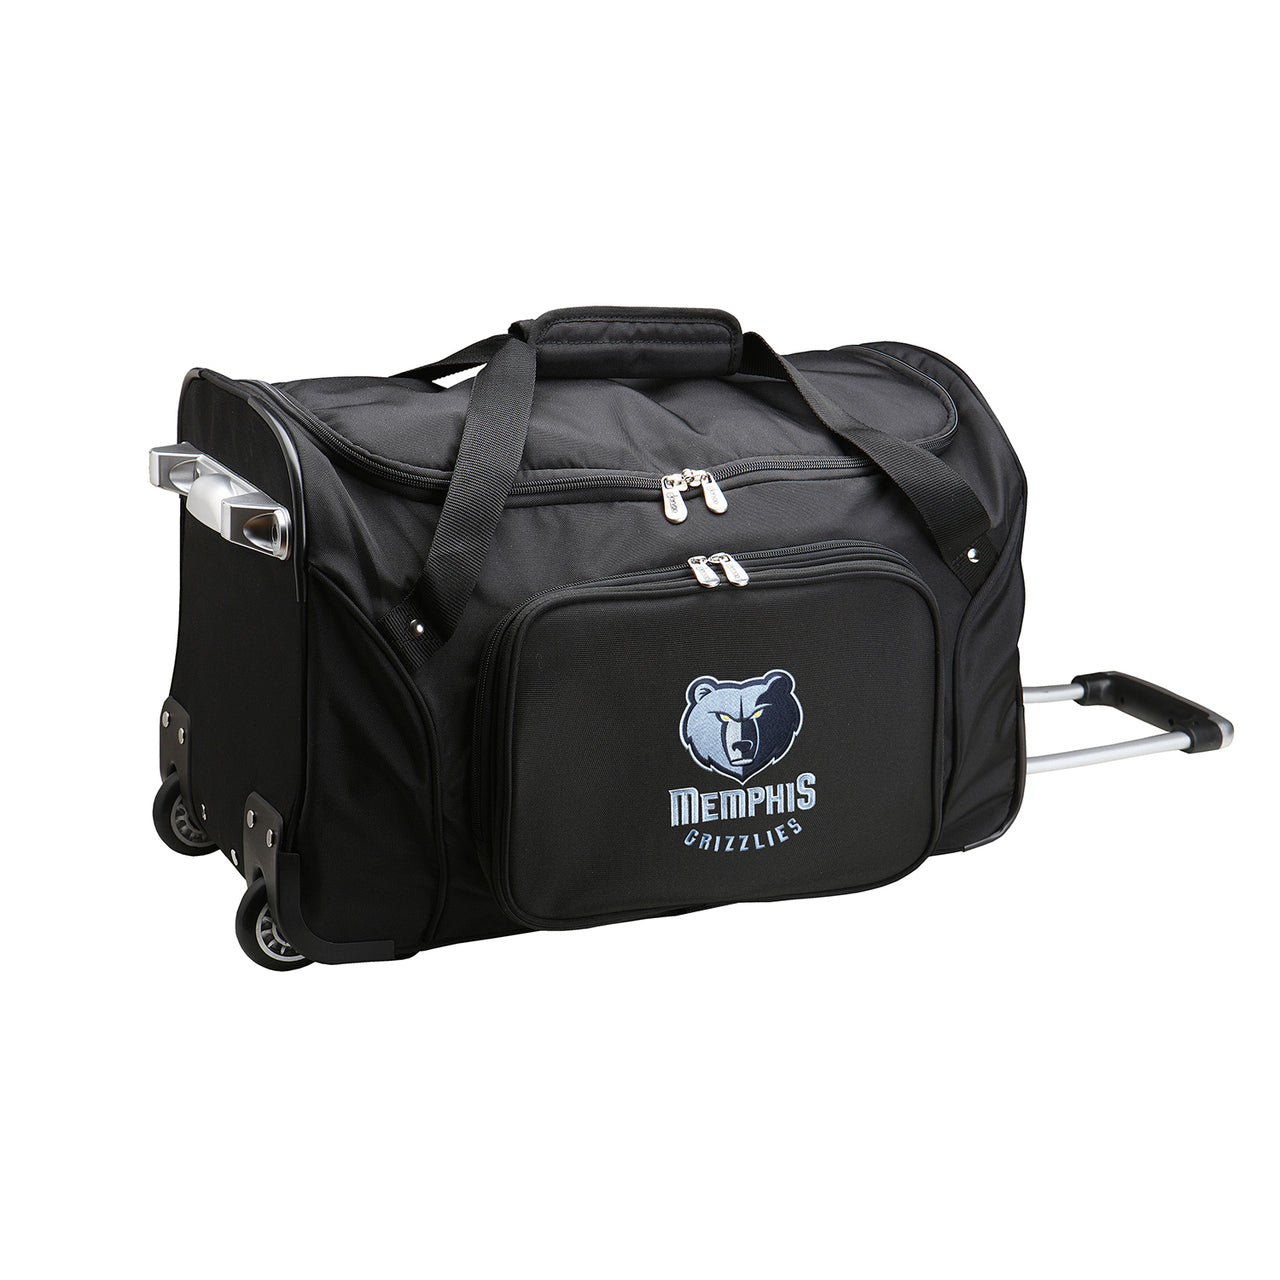 NBA Memphis Grizzlies Luggage | NBA Memphis Grizzlies Wheeled Carry On Luggage